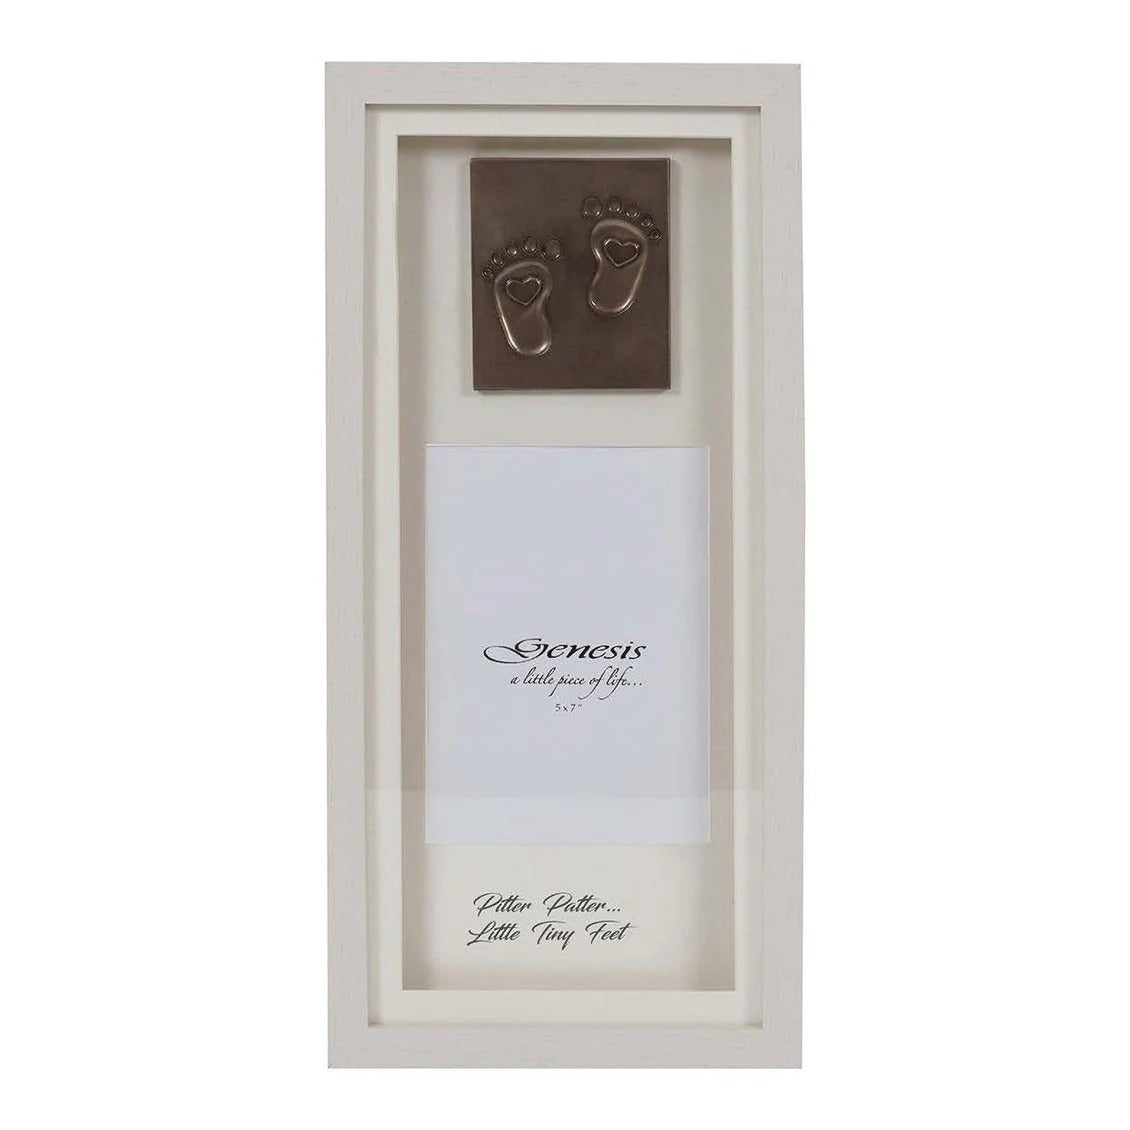 GENESIS PITTER PATTER OF TINY FEET 5 X 7"  PHOTO FRAME